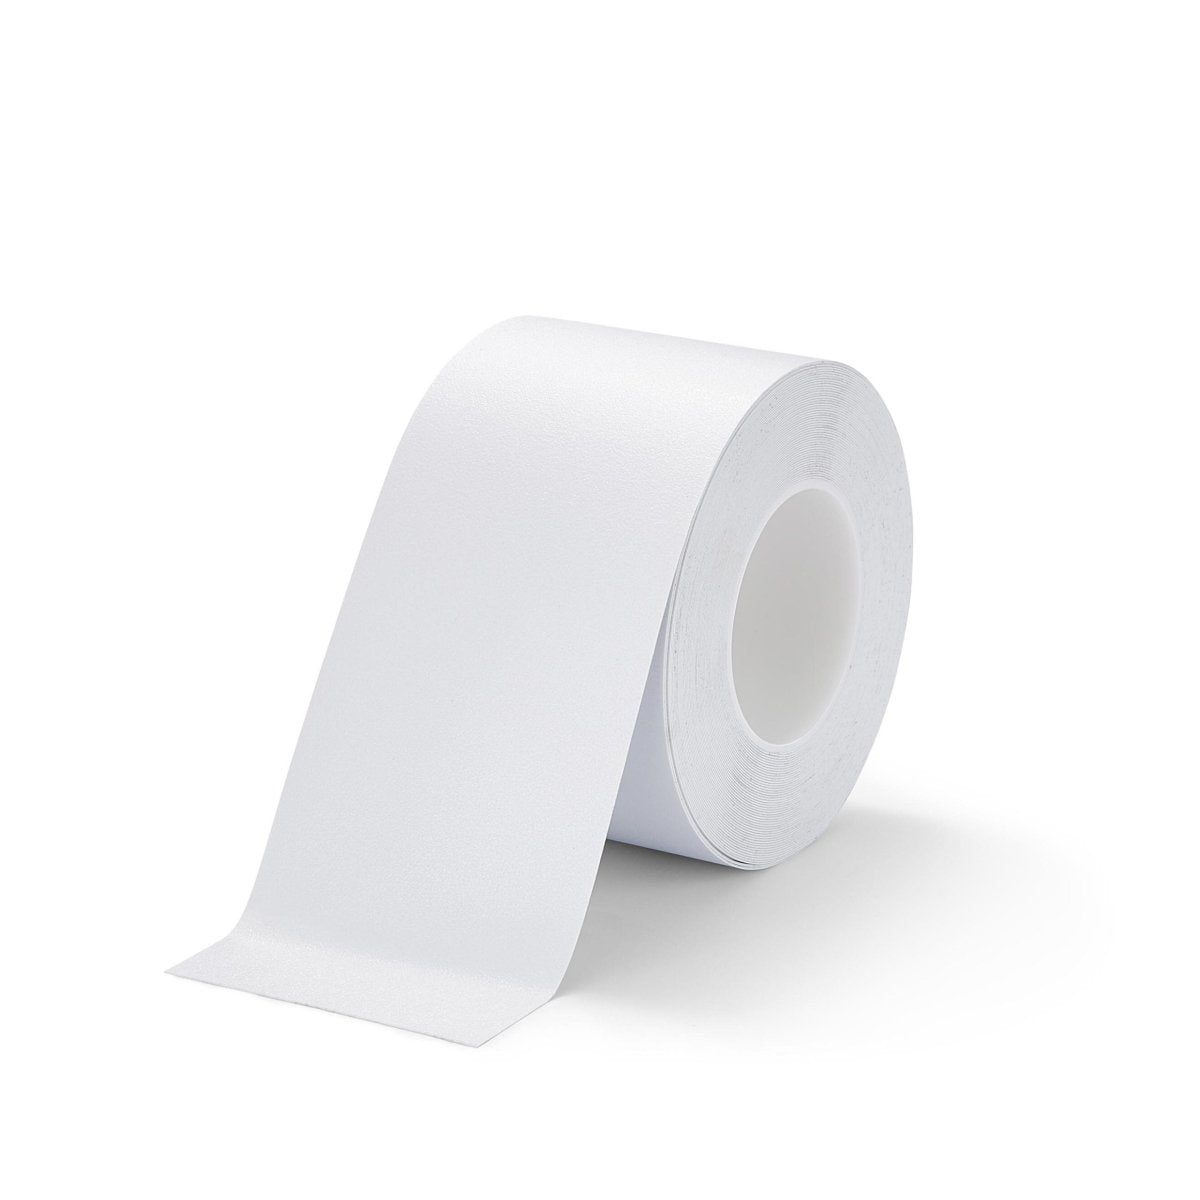 Resilient Soft Touch Textured "Rubber Feel" Anti-Slip Tape - Slips Away - H3408W-White-Resilient-100mm -